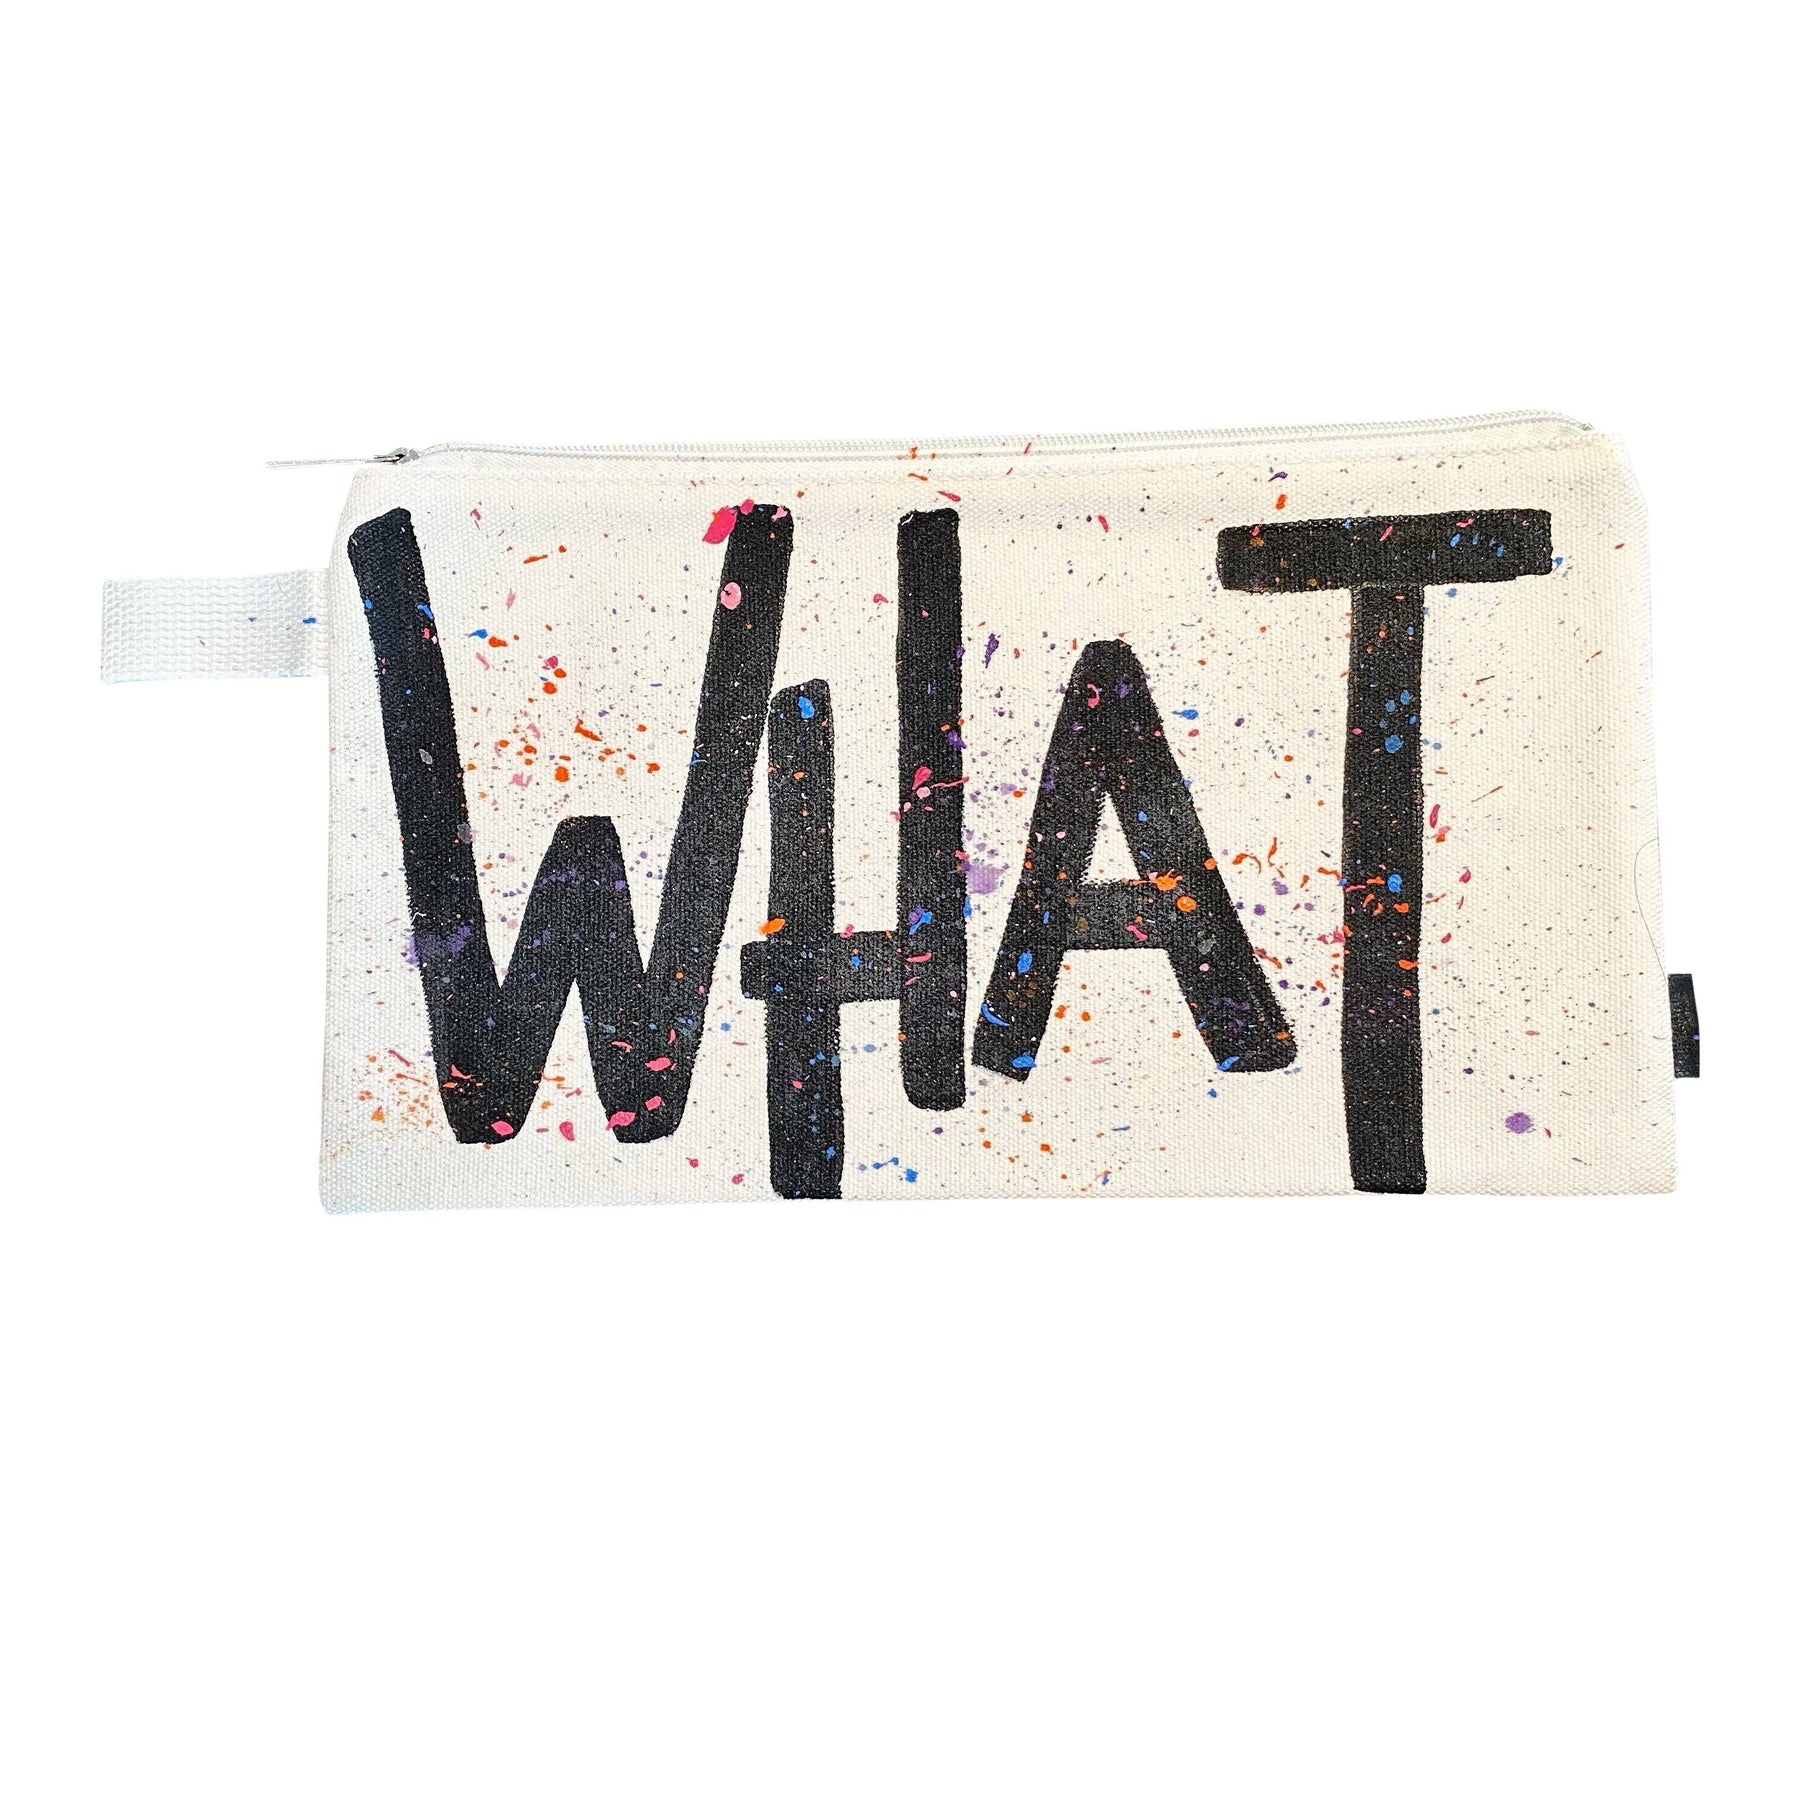 'WHAT EVER' PAINTED POUCH